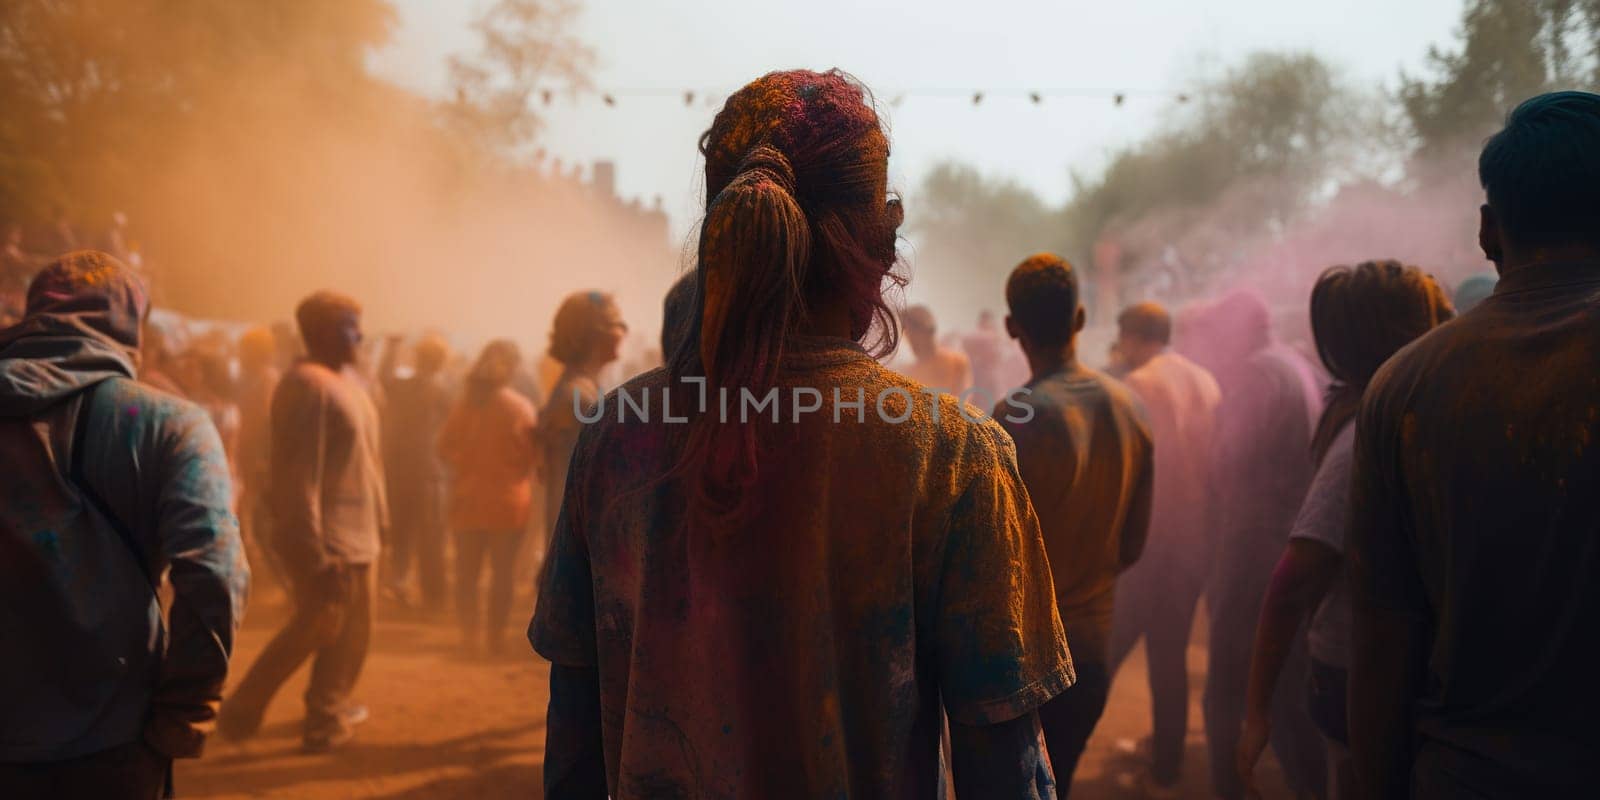 Crowd Of People Celebrating Holy Holiday With Colorful Powder Paints by tan4ikk1